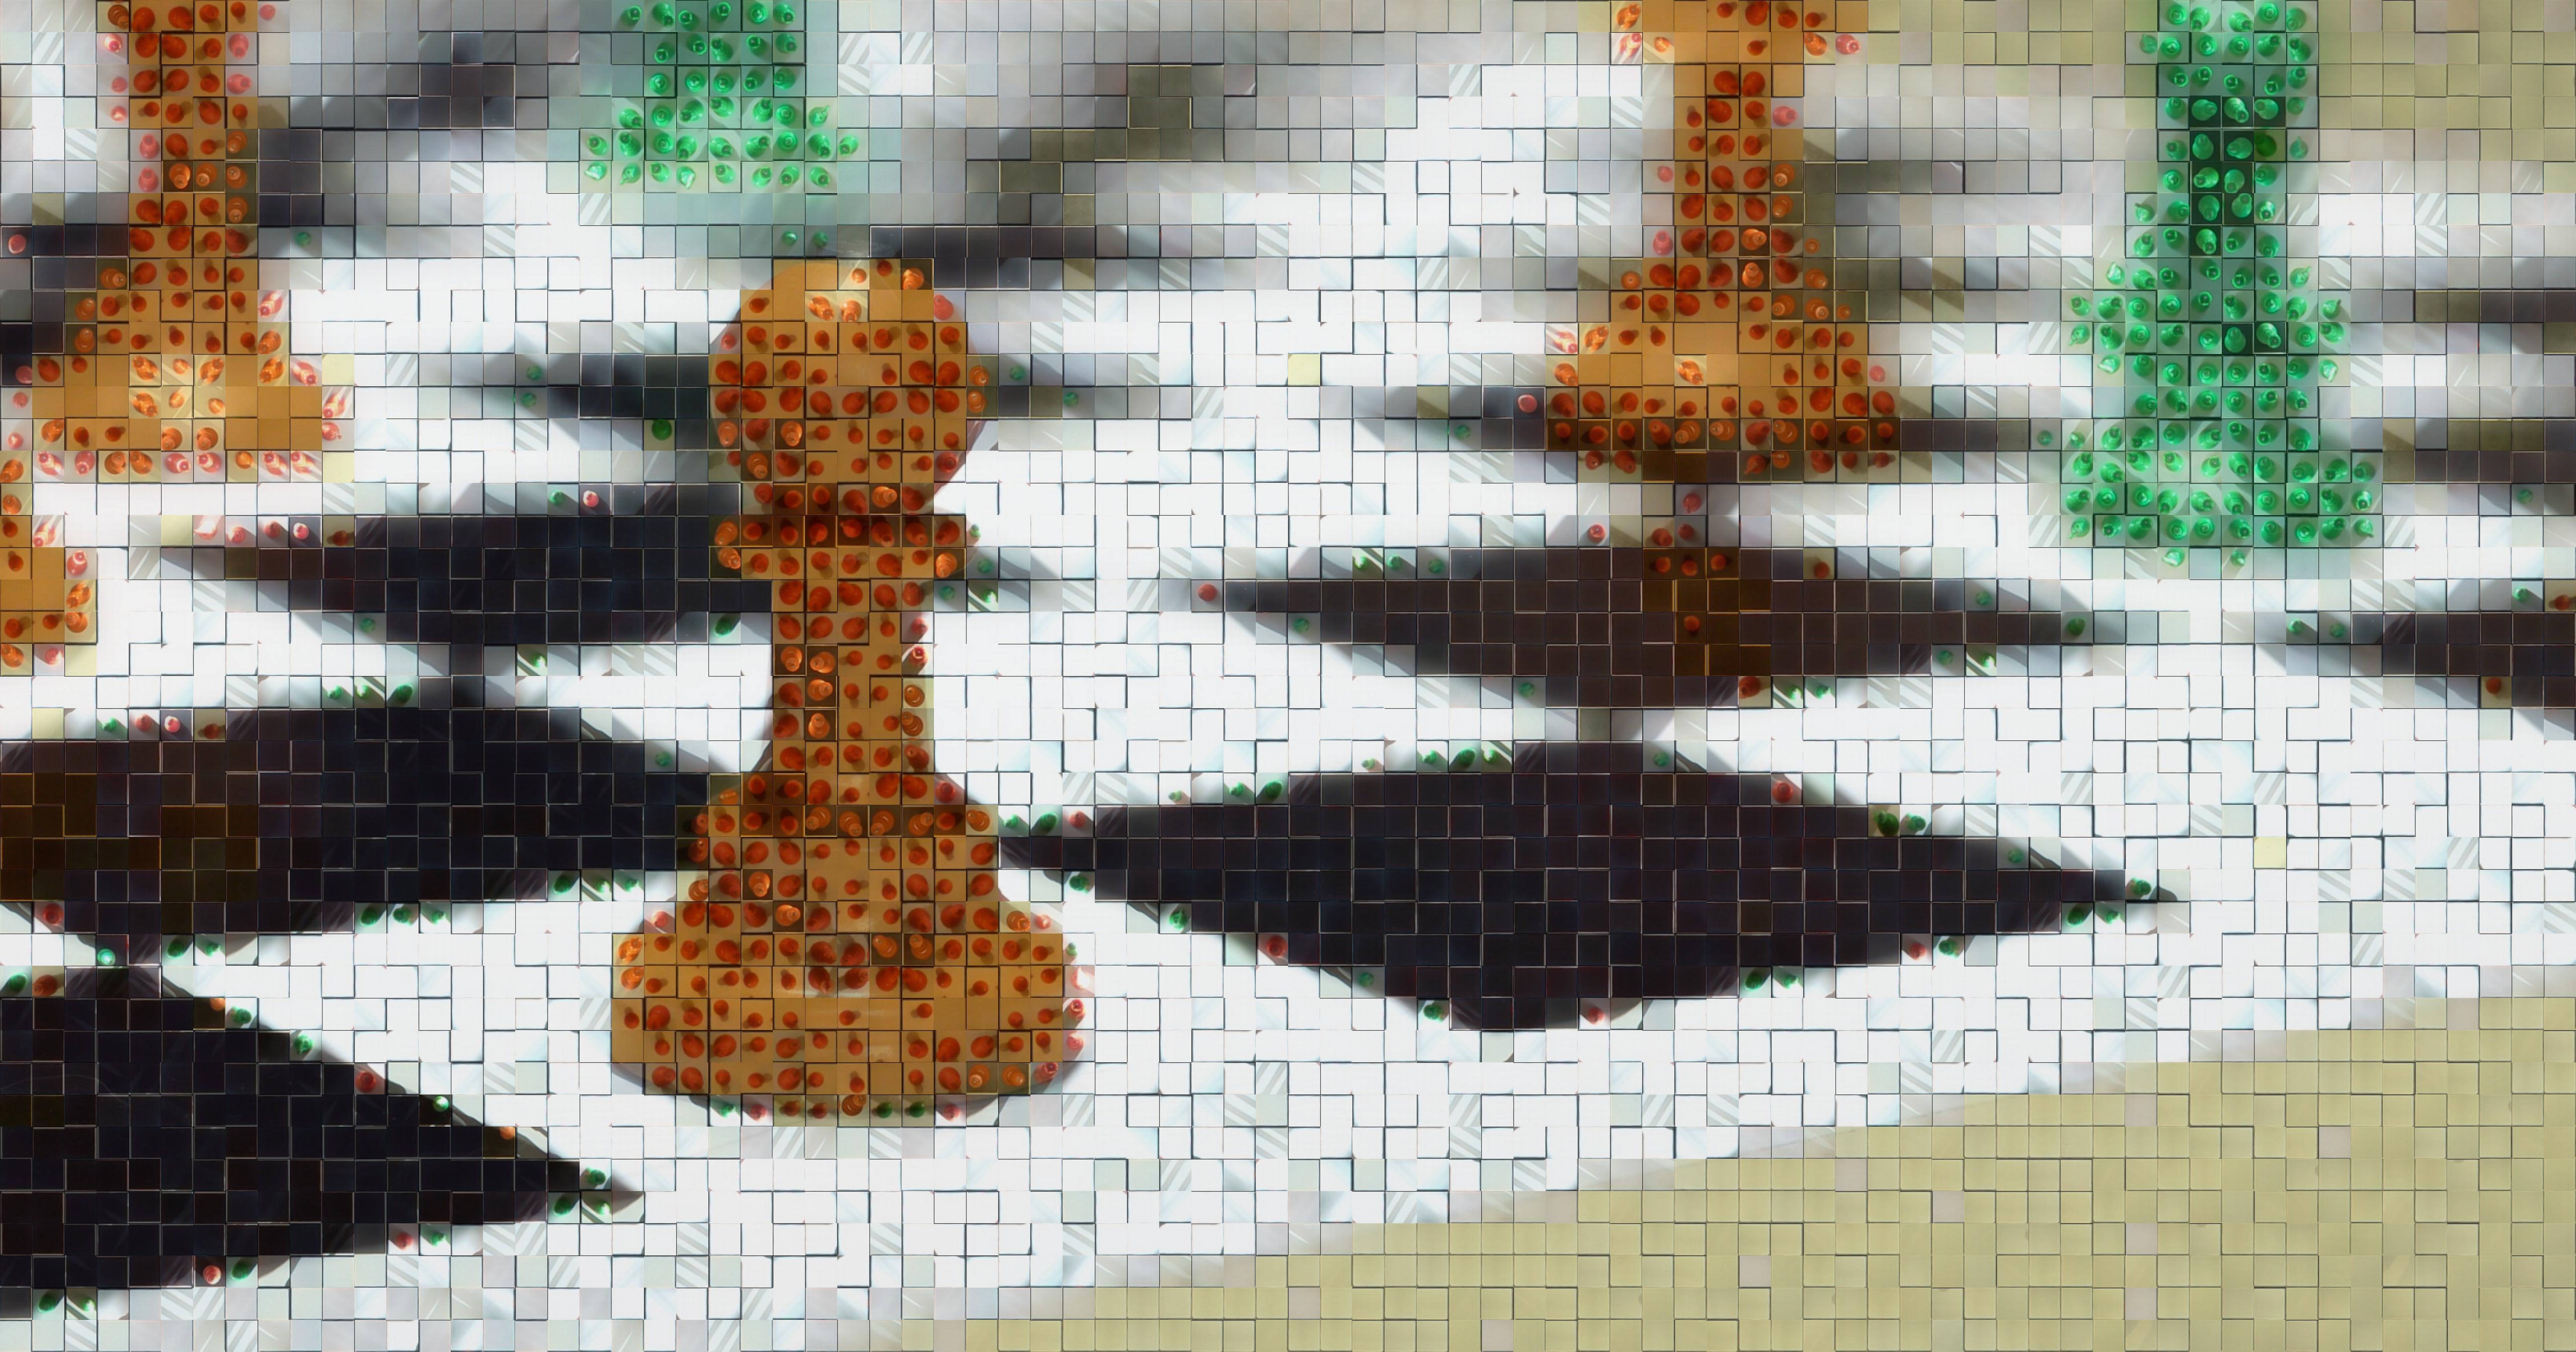 Abstract mosiac of chess pieces made out of images from the dataset.